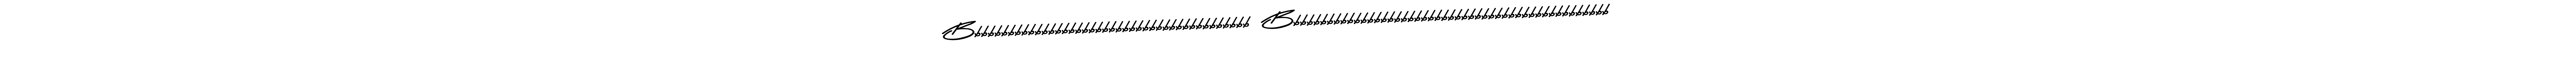 Bbbbbbbbbbbbbbbbbbbbbbbbbbbbbbbbbbbbbbbbbb! Bbbbbbbbbbbbbbbbbbbbbbbbbbbbbbbbbbbbbbbbbbbbbbbb stylish signature style. Best Handwritten Sign (Asem Kandis PERSONAL USE) for my name. Handwritten Signature Collection Ideas for my name Bbbbbbbbbbbbbbbbbbbbbbbbbbbbbbbbbbbbbbbbbb! Bbbbbbbbbbbbbbbbbbbbbbbbbbbbbbbbbbbbbbbbbbbbbbbb. Bbbbbbbbbbbbbbbbbbbbbbbbbbbbbbbbbbbbbbbbbb! Bbbbbbbbbbbbbbbbbbbbbbbbbbbbbbbbbbbbbbbbbbbbbbbb signature style 9 images and pictures png